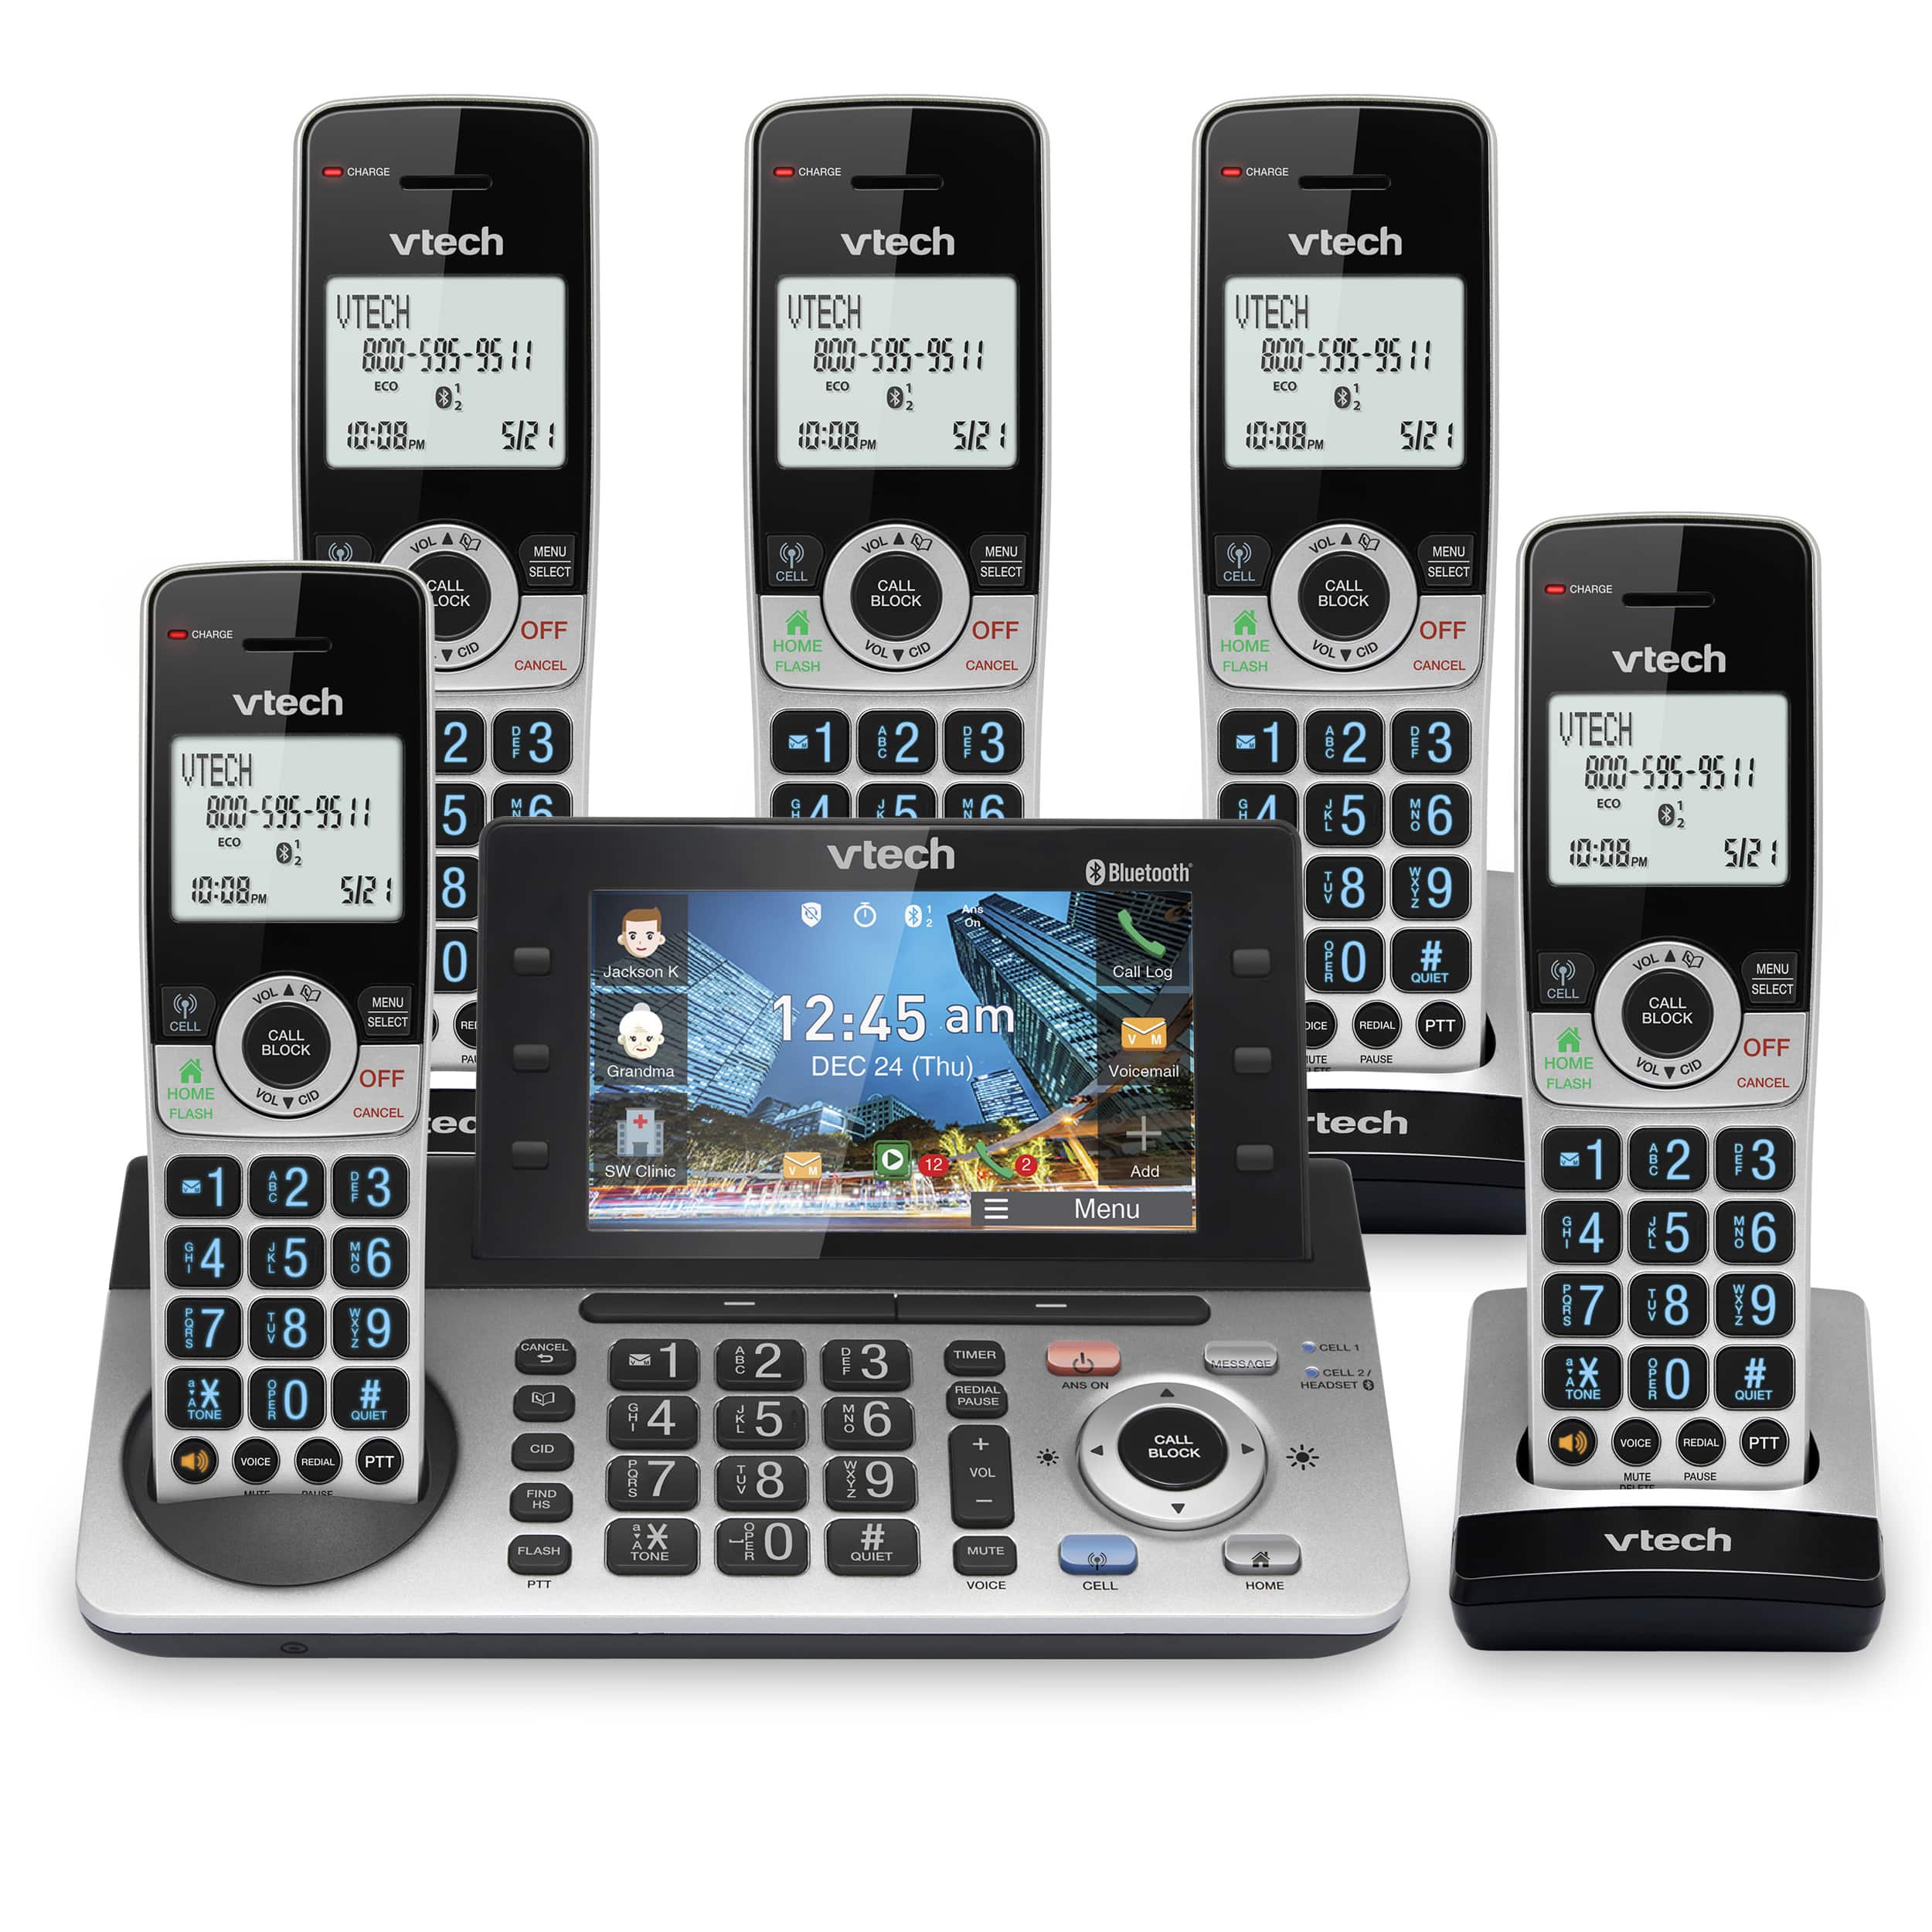 5-Handset Expandable Cordless Phone with Bluetooth Connect to Cell, Smart Call Blocker,  Answering System, and 5" Color Base Display - view 1